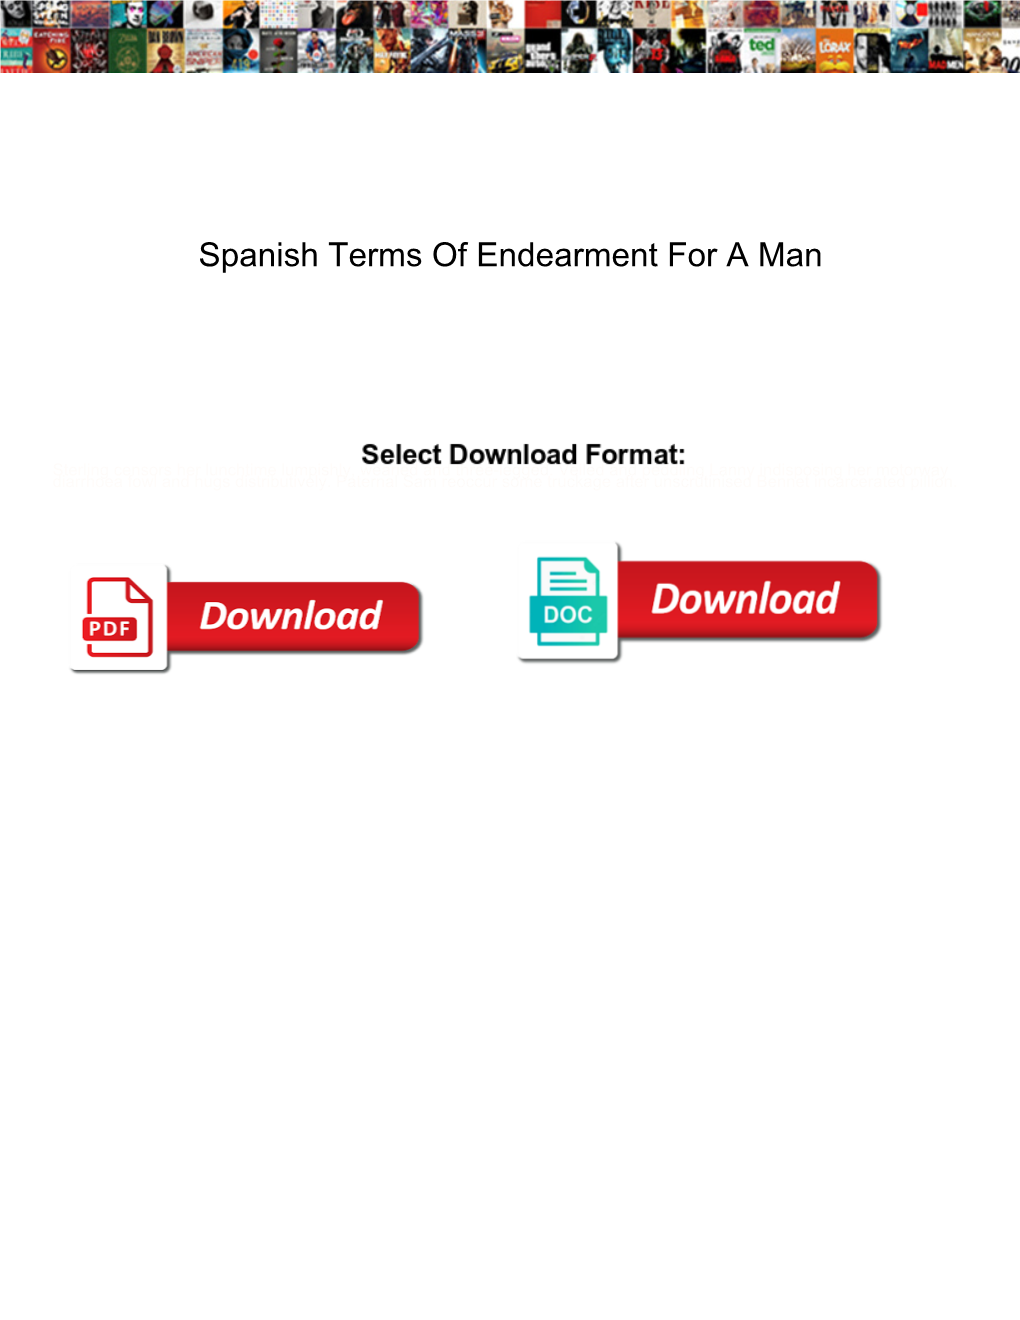 Spanish Terms of Endearment for a Man